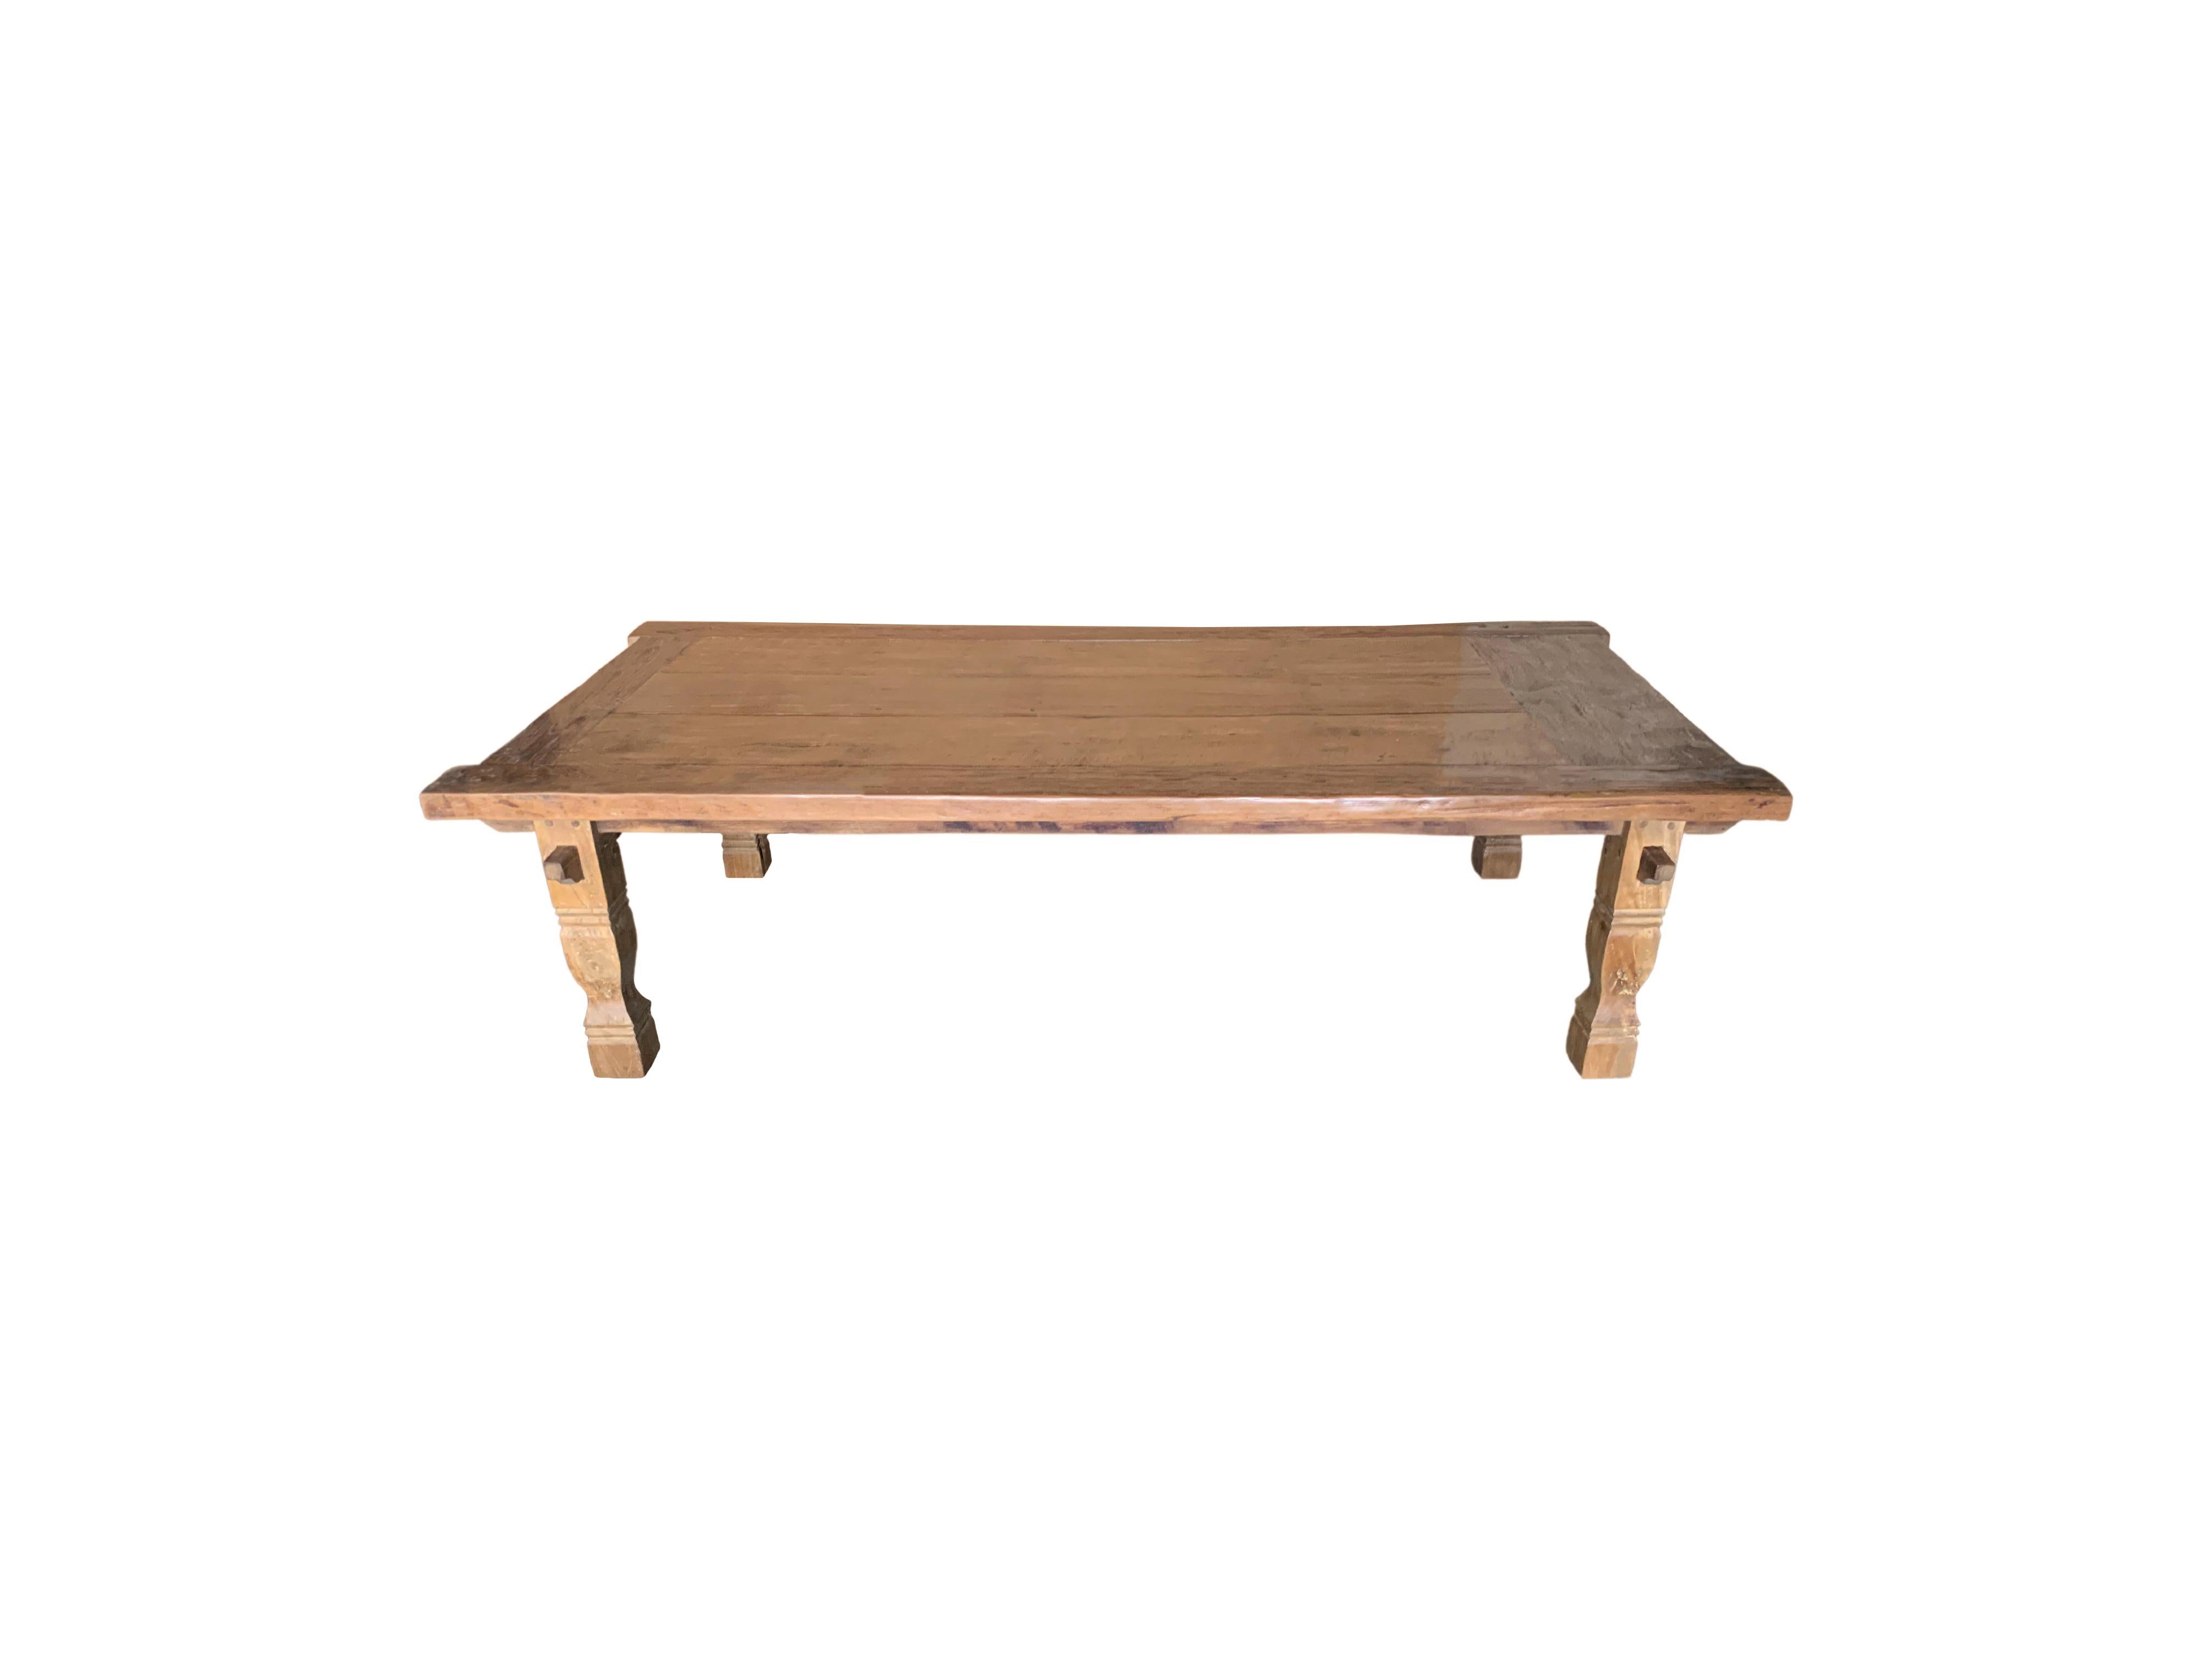 This solid teak weaving table was crafted in Java, Indonesia. An Indonesian weaver would sit atop this table to carry out their weaving. A wonderful piece of history. The table in the modern day would make for a wonderful sofa / coffee table. The